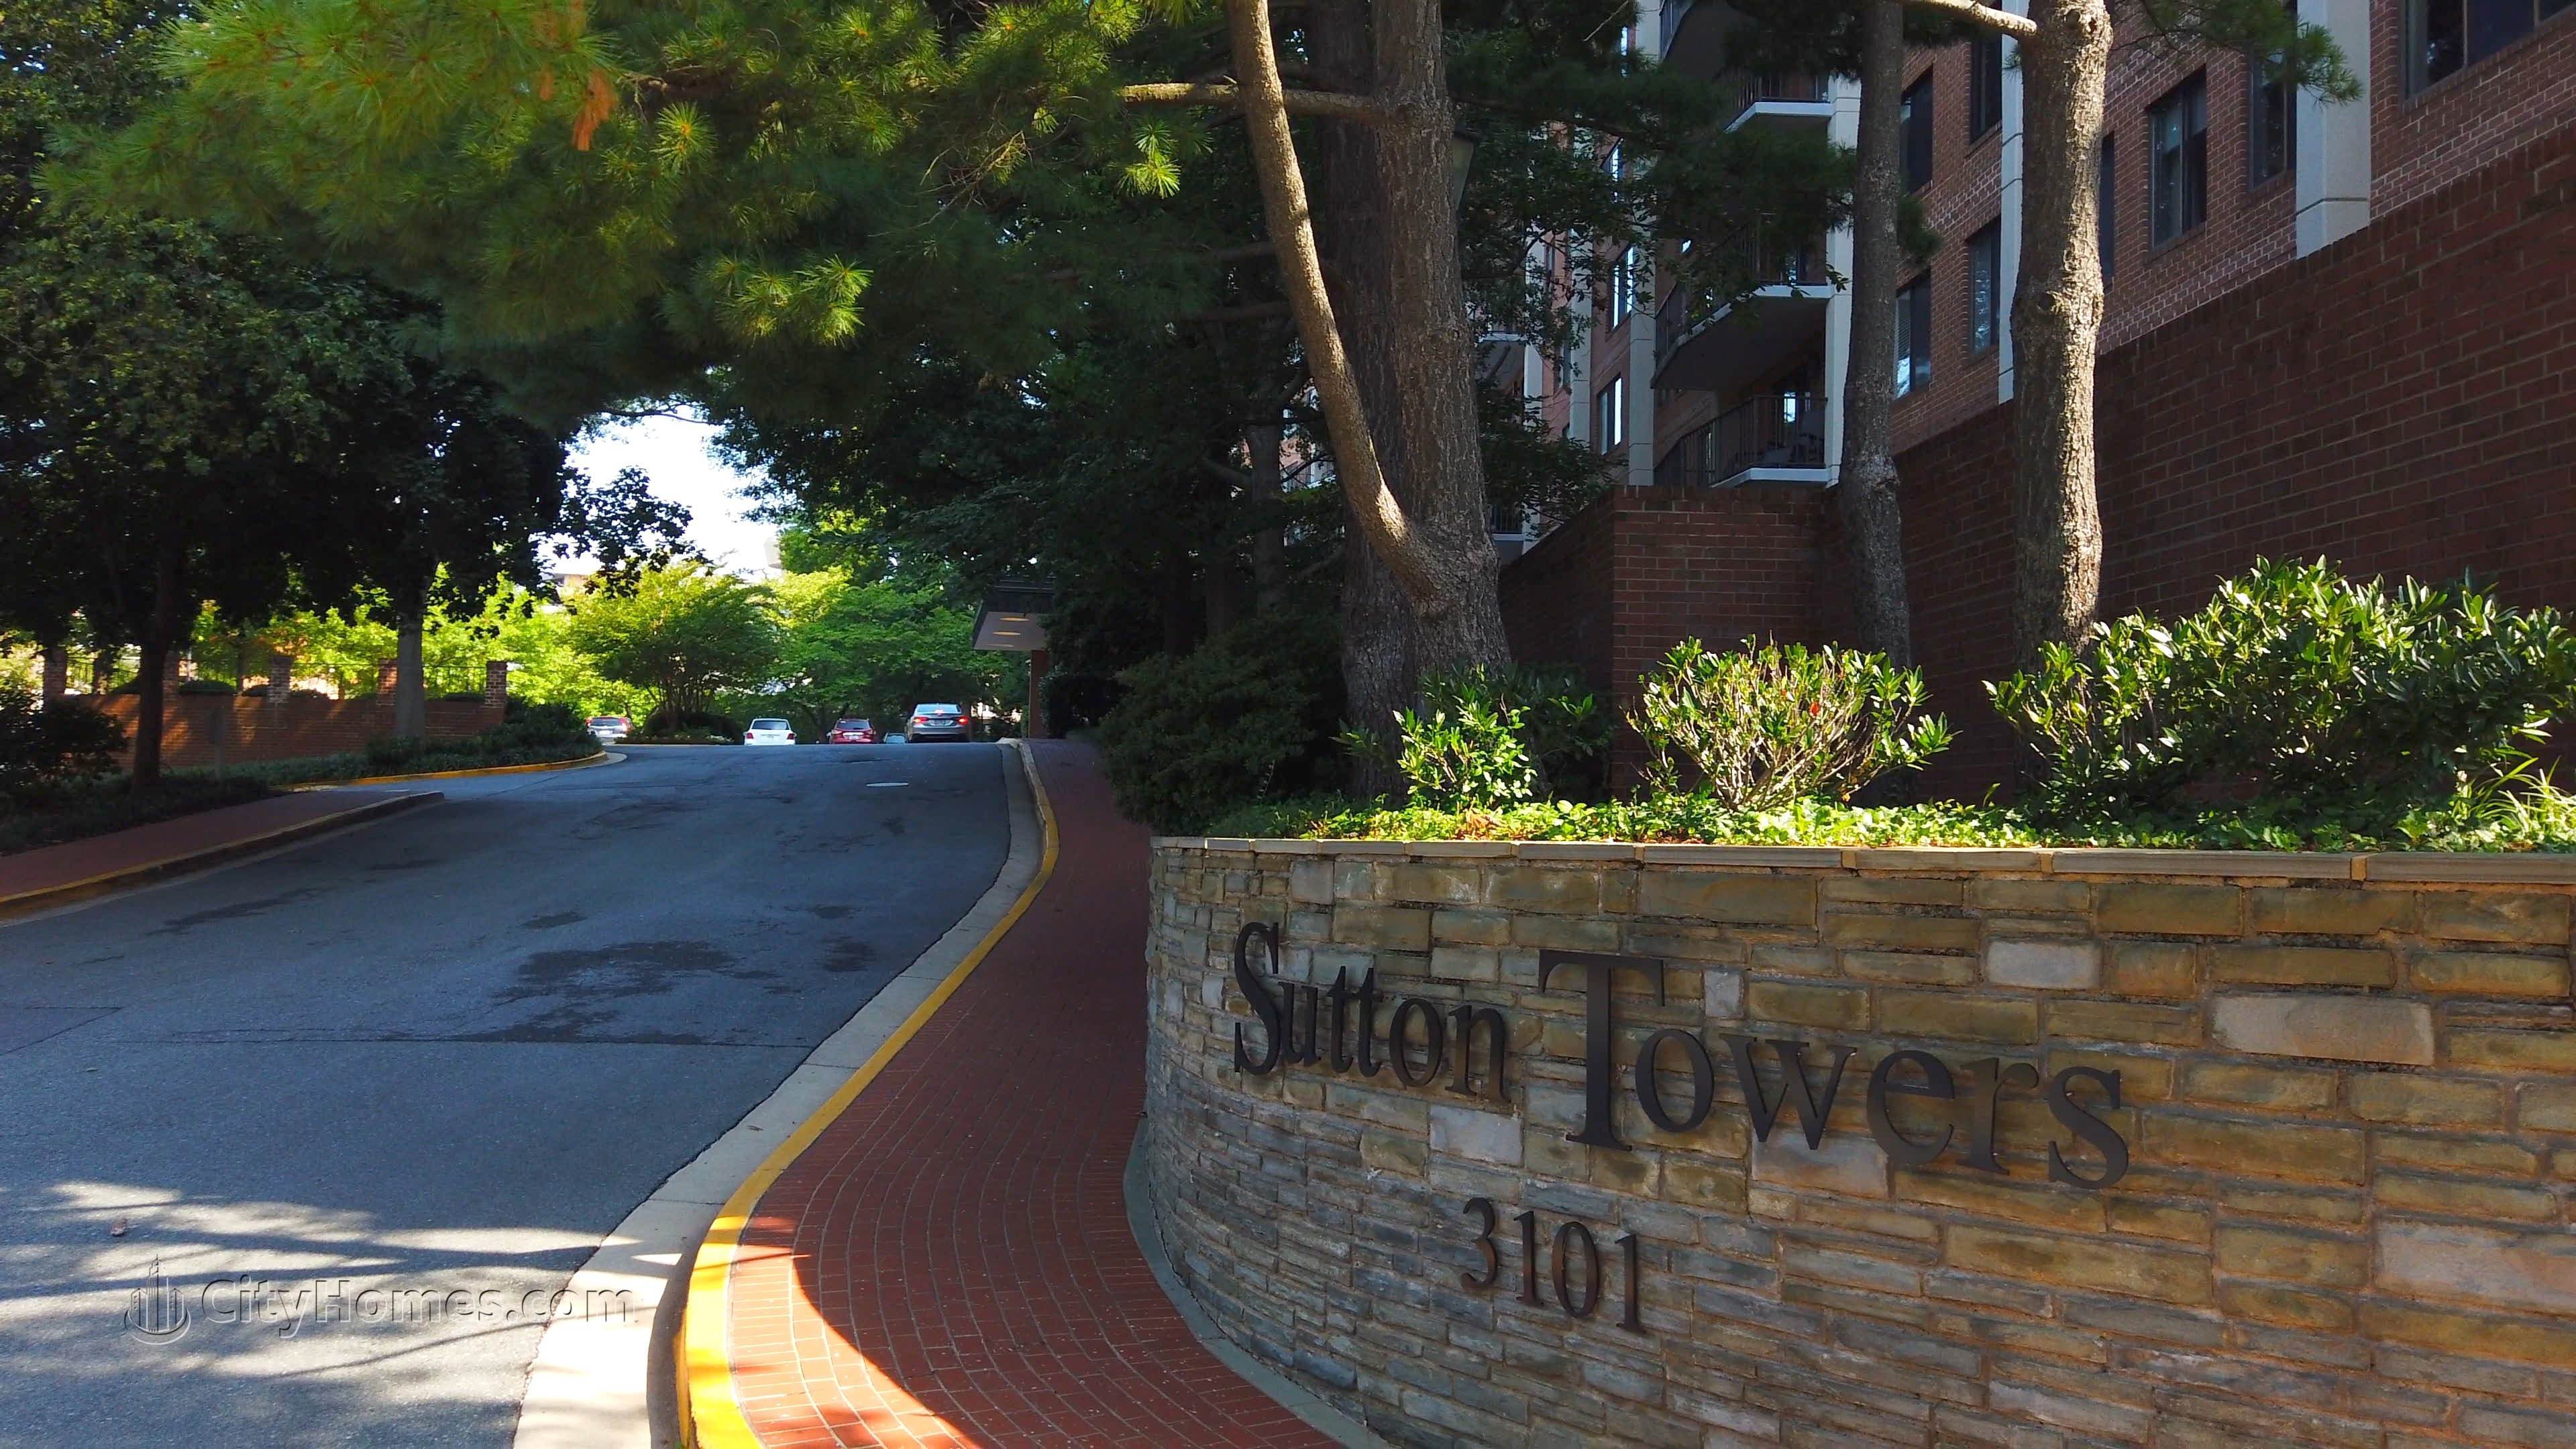 Sutton Towers building at 3101 New Mexico Ave NW, Wesley Heights, Washington, DC 20016